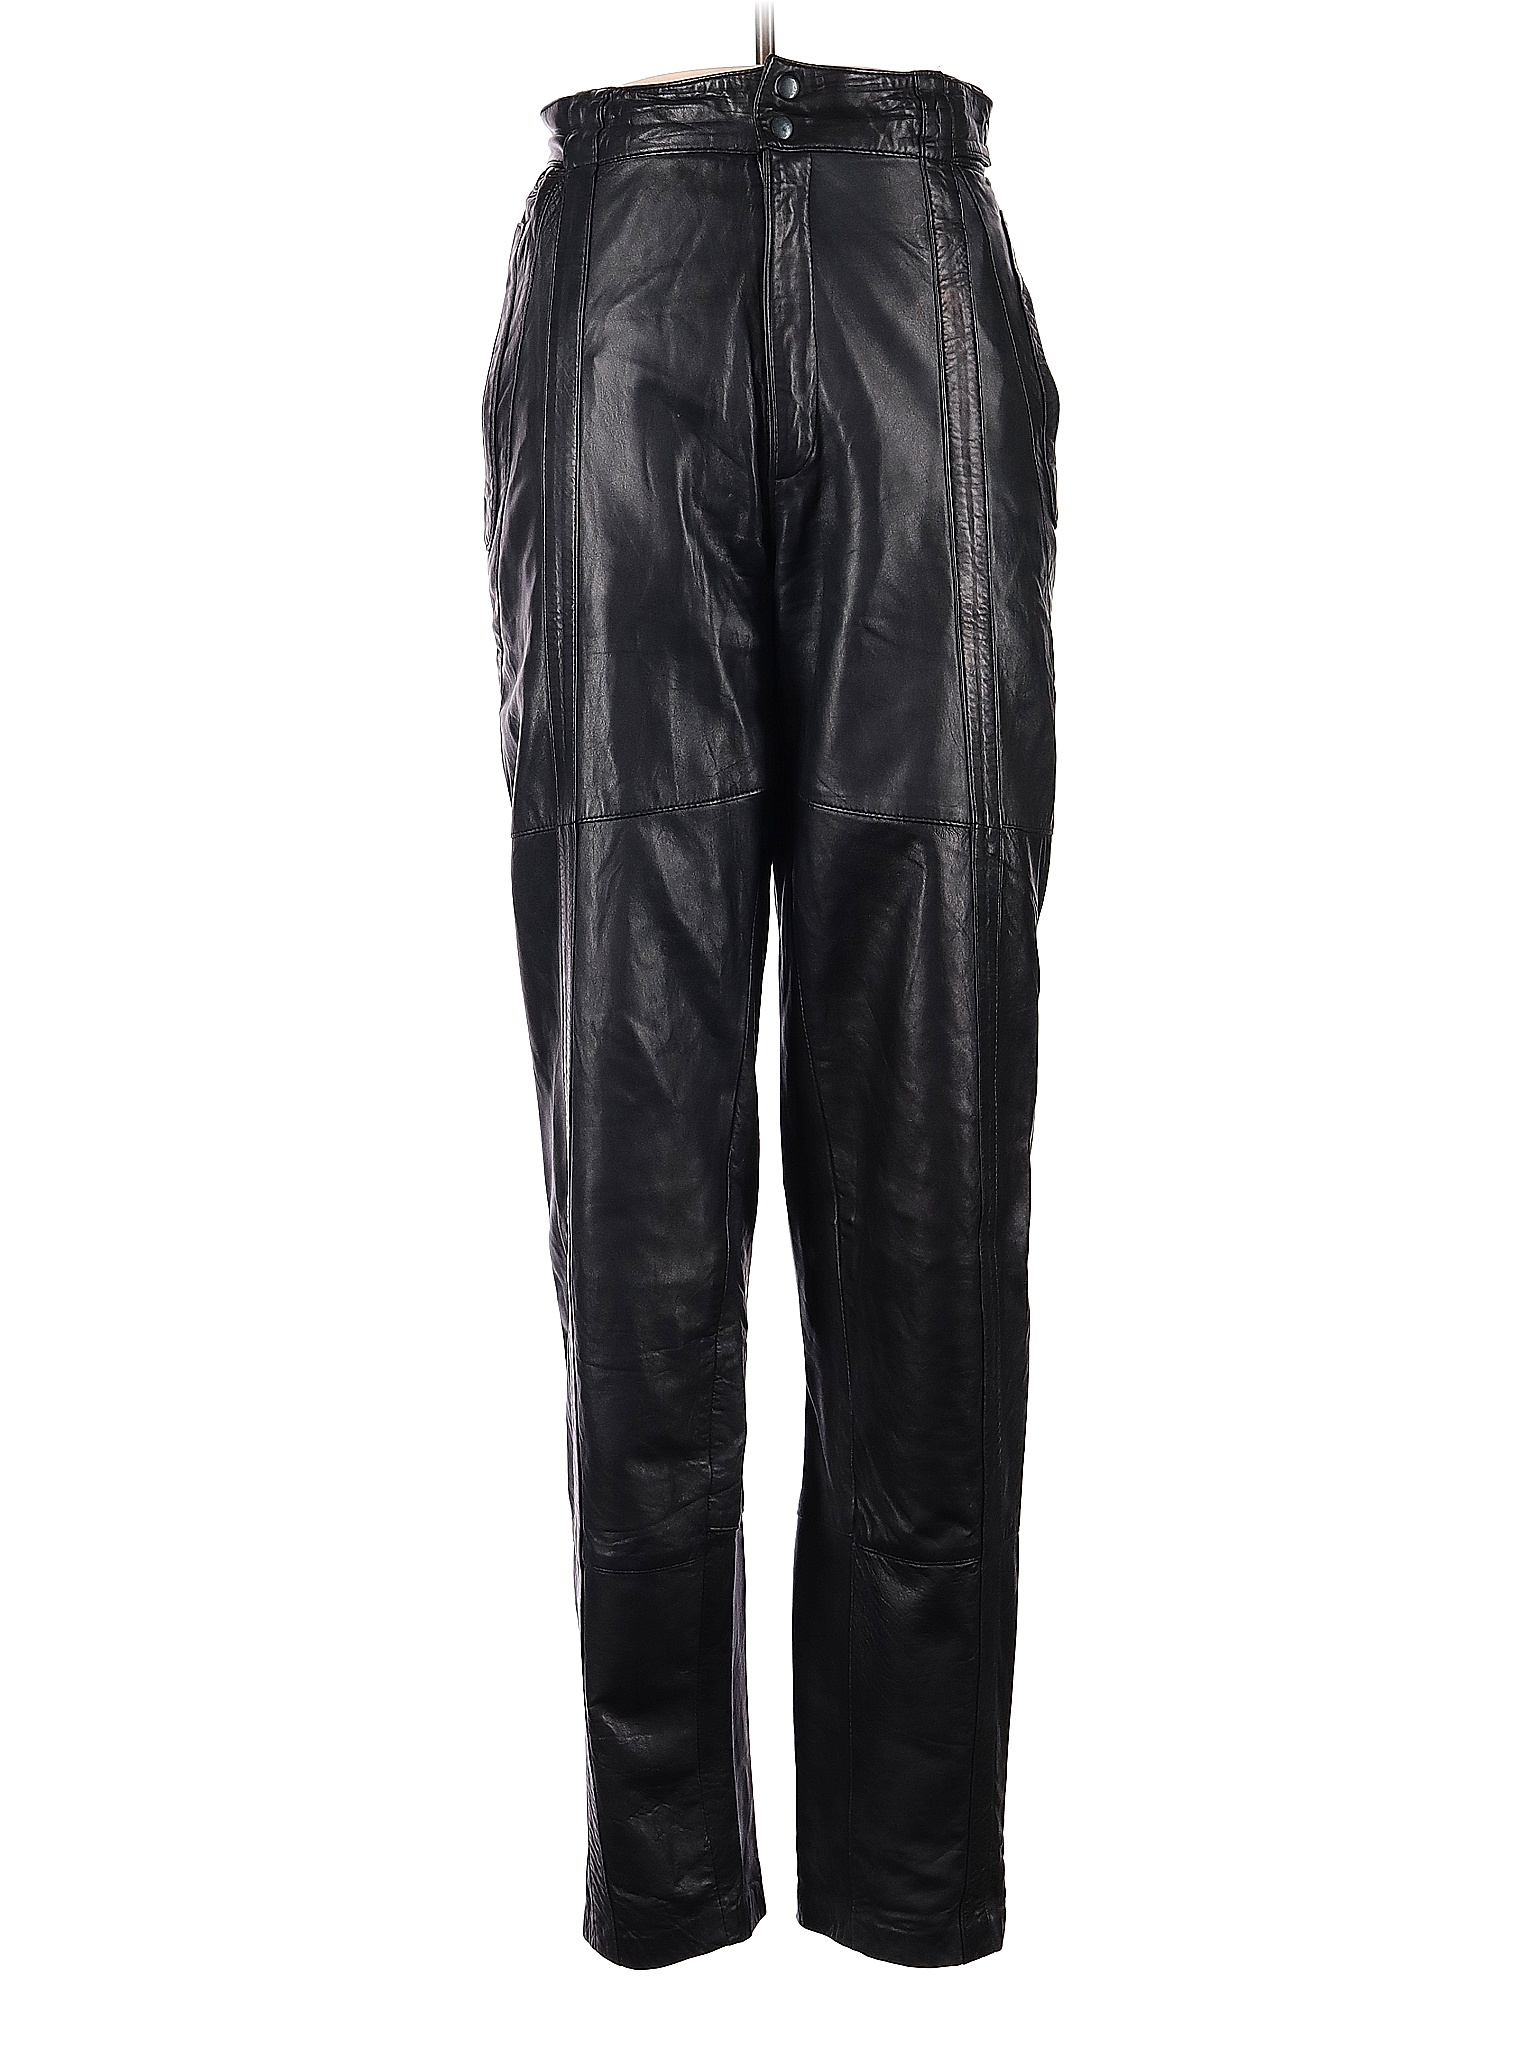 Michael Hoban for North Beach 100% Leather Black Leather Pants Size 12 ...